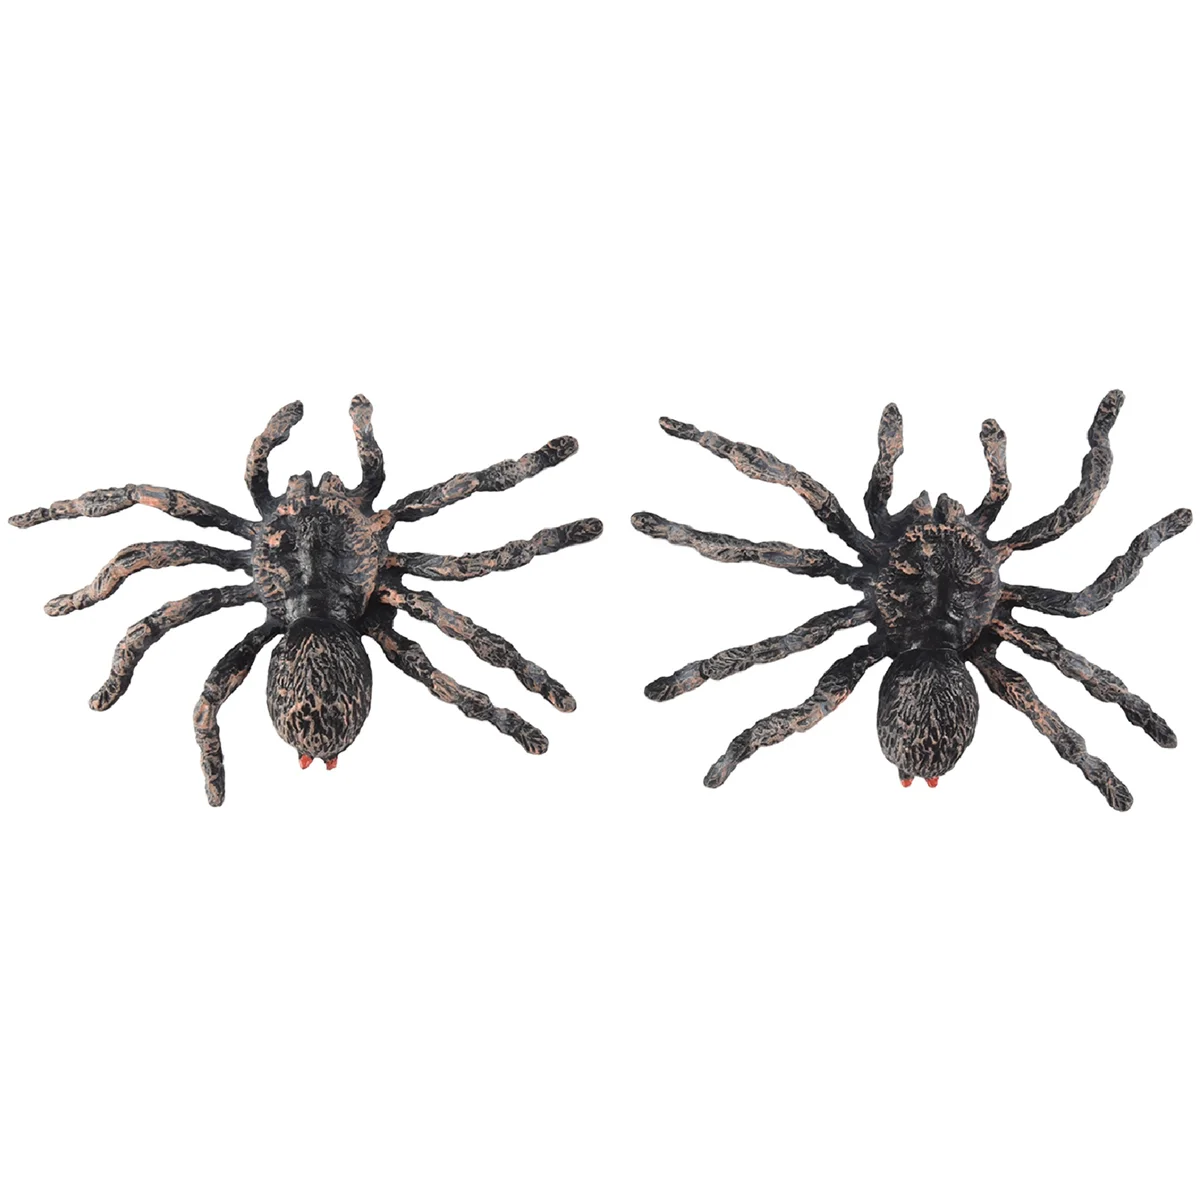 

2Pcs 9.5cm Large Fake Realistic Spider Insect Model Toy Fun Halloween Scary Prop